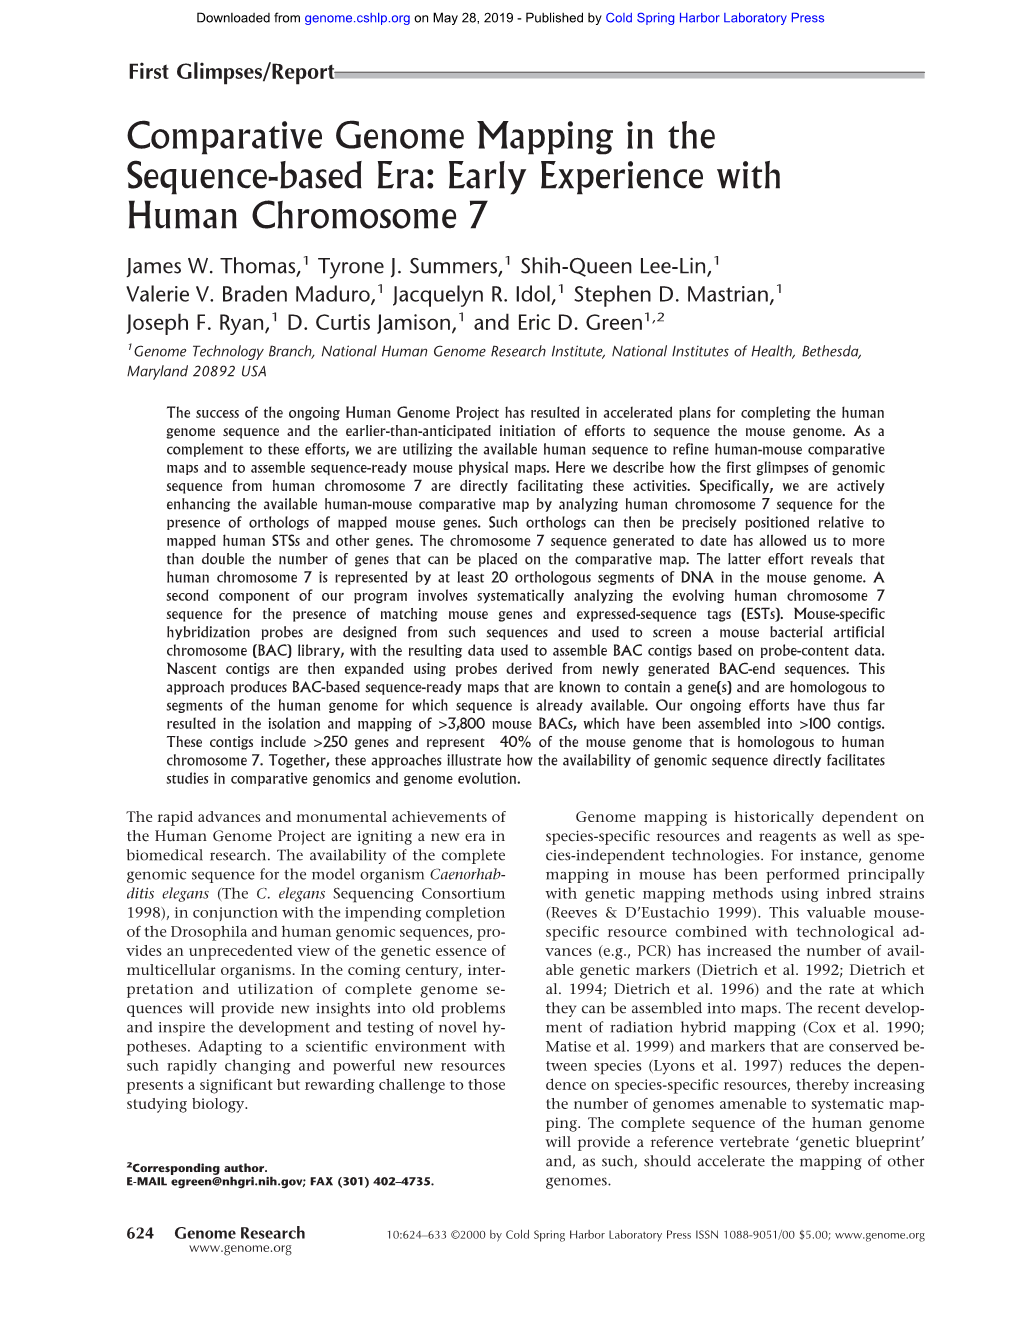 Comparative Genome Mapping in the Sequence-Based Era: Early Experience with Human Chromosome 7